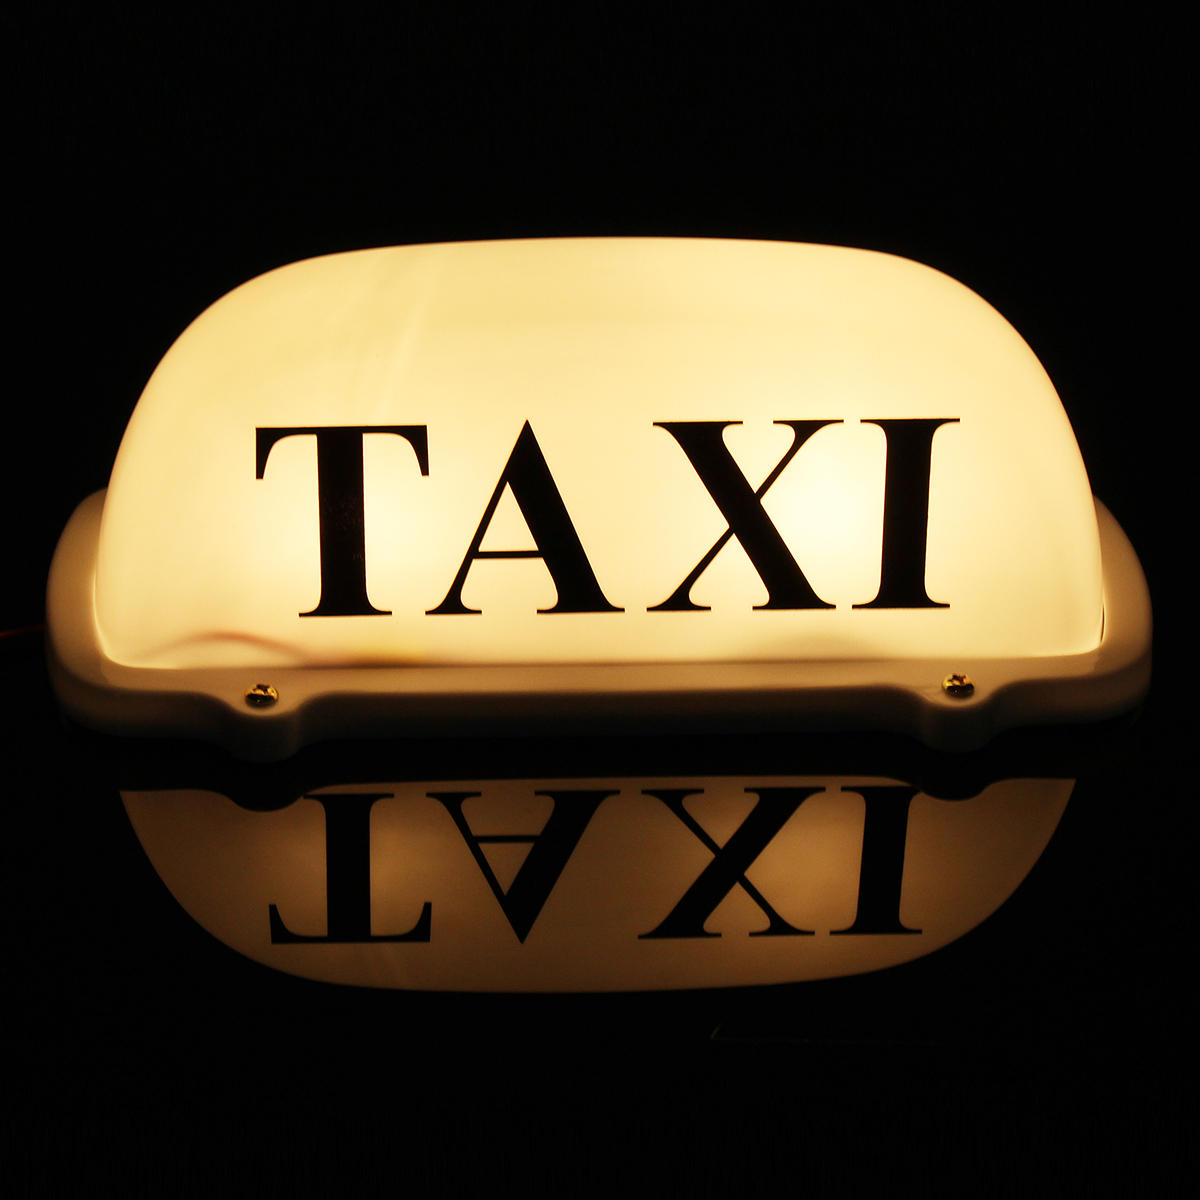 Yellow LED Light Lamp Taxi Cab Roof Top Sign Topper Shell Magnetic Base 12V US